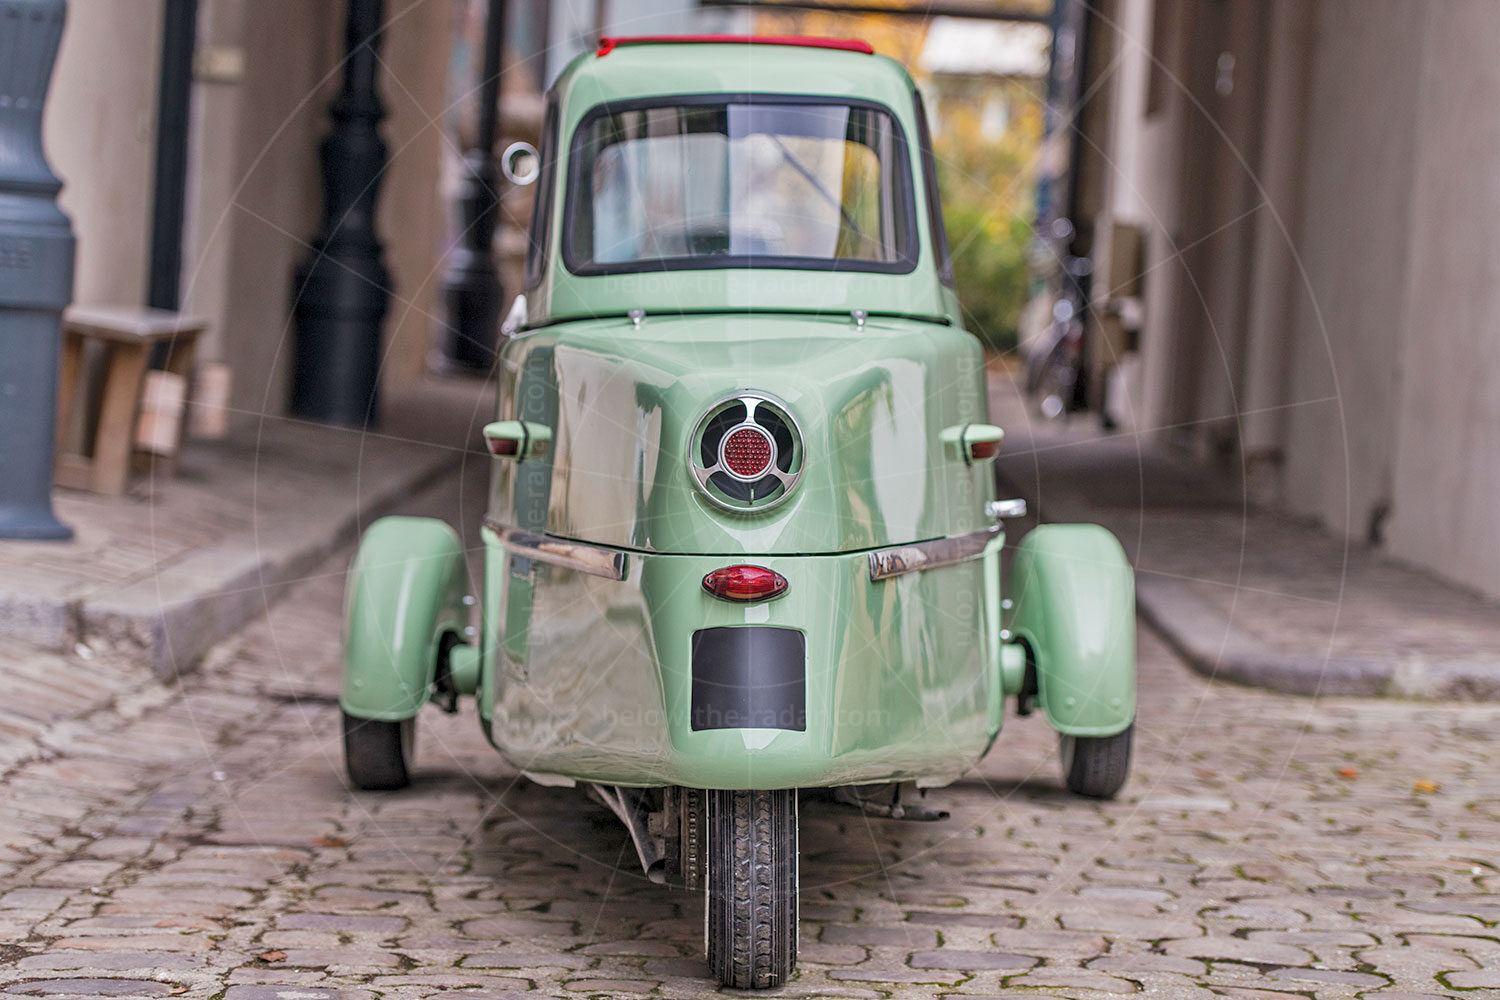 SNCAN Inter 175A Autoscooter Berline Pic: RM Sotheby's | SNCAN Inter 175A Autoscooter Berline